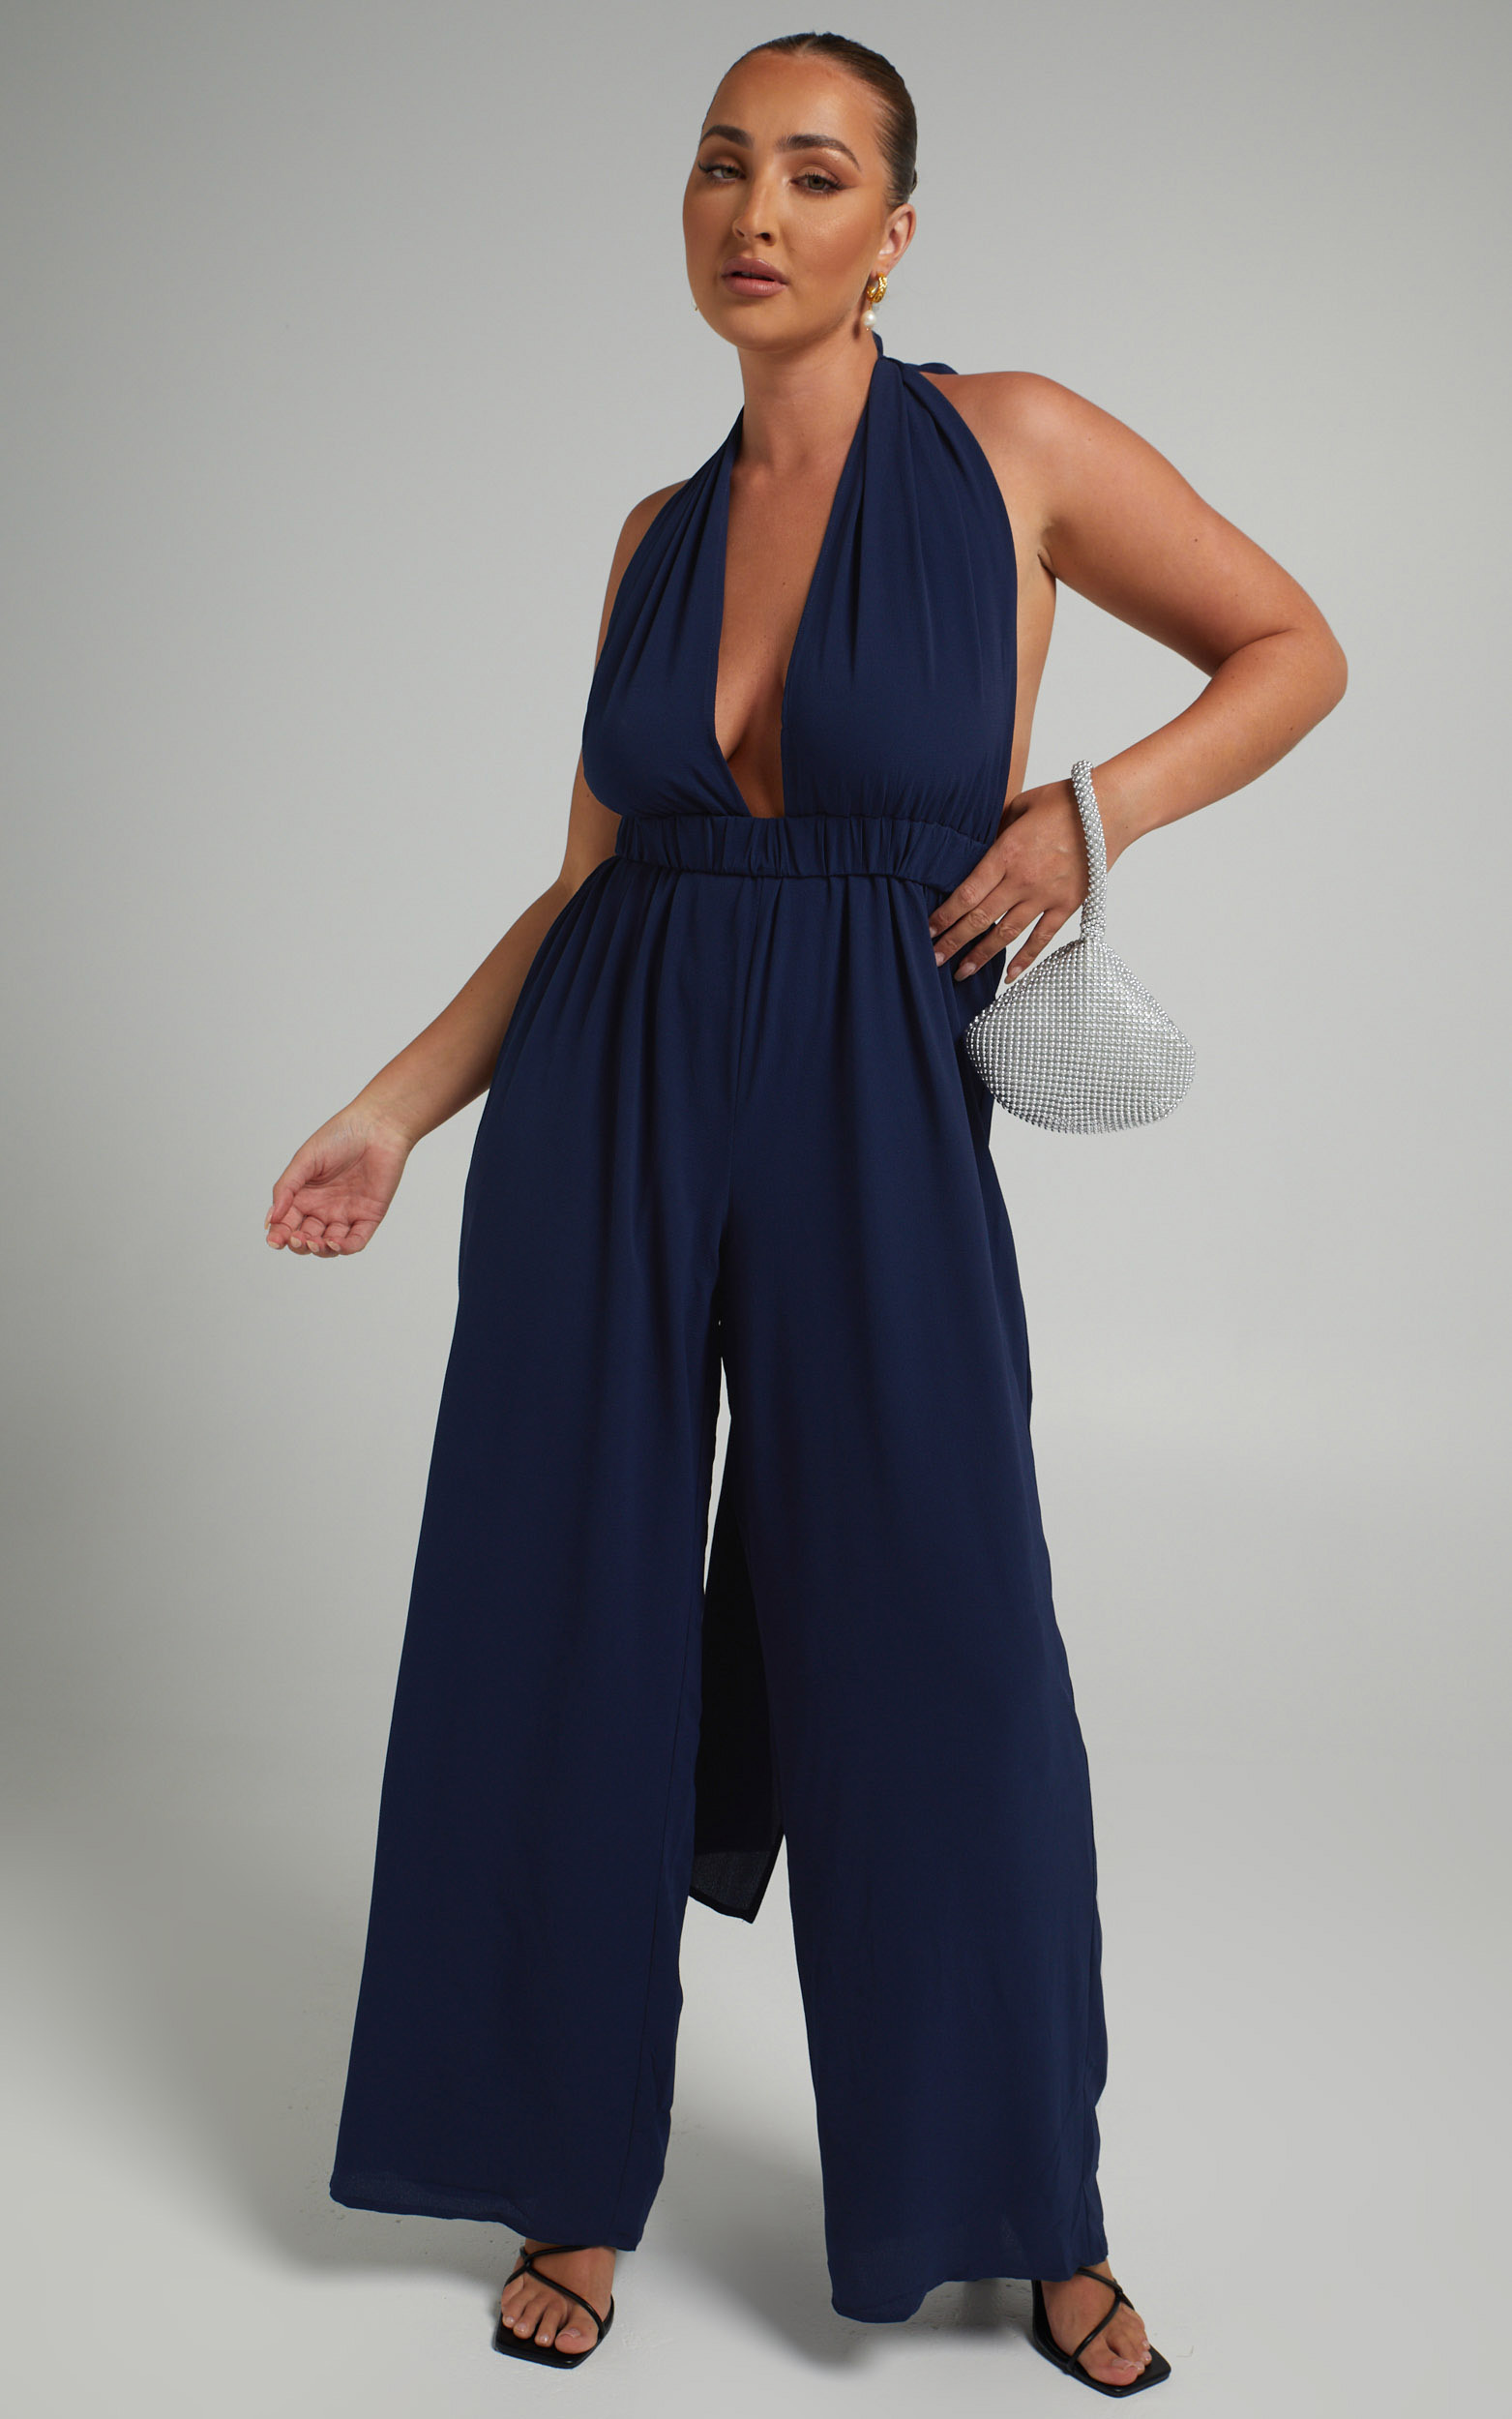 Girls Life Jumpsuit in Navy - 20, NVY5, hi-res image number null